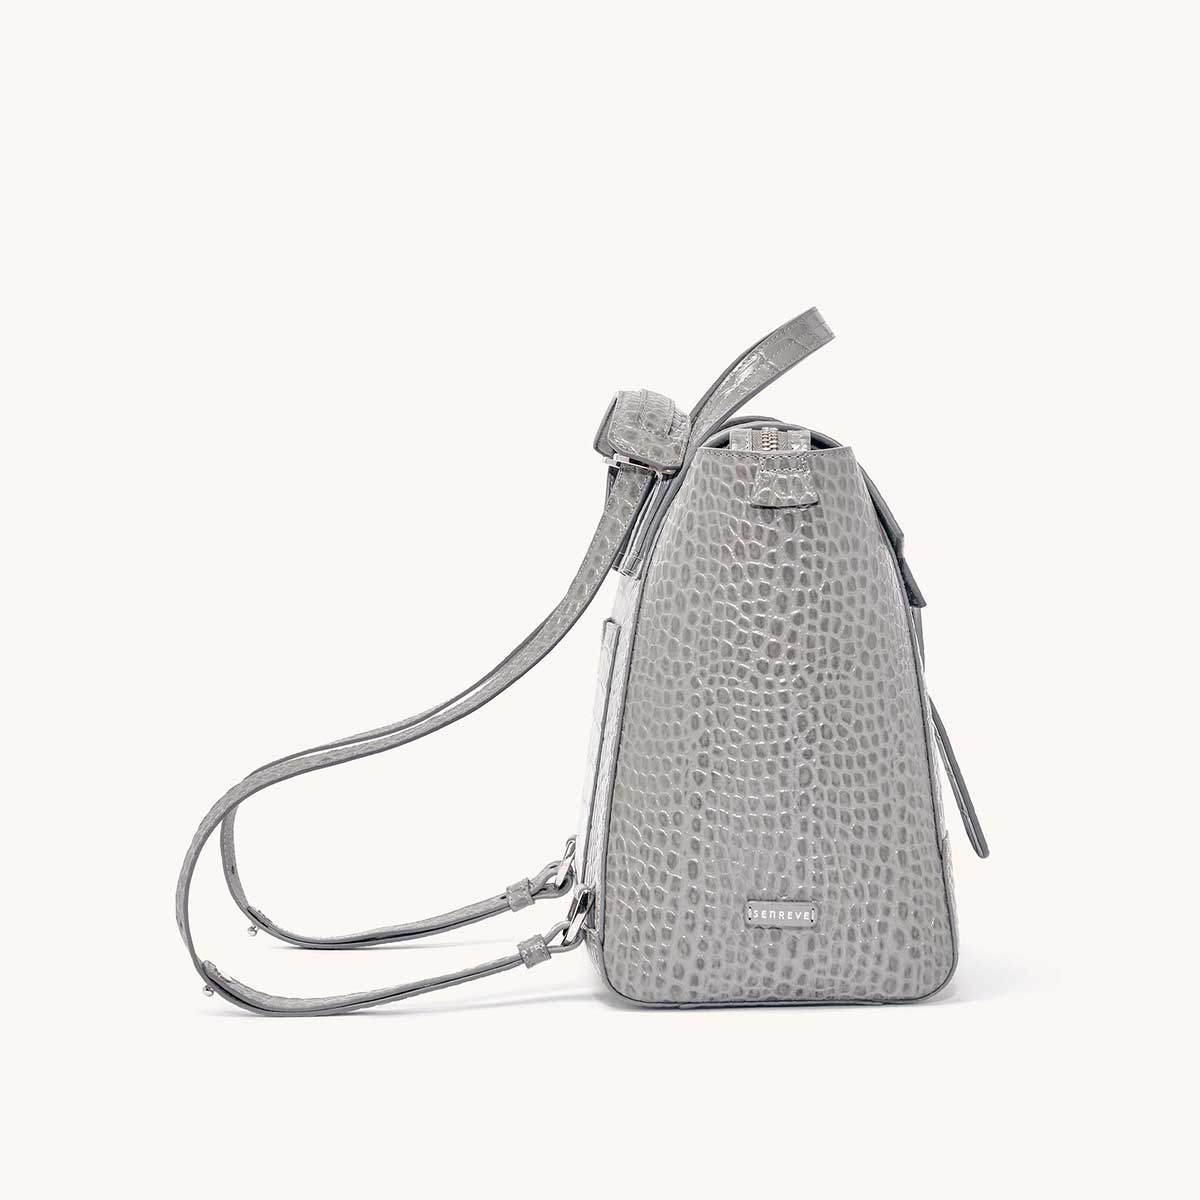 Maestra Bag Dragon Storm with Silver Hardware Side View